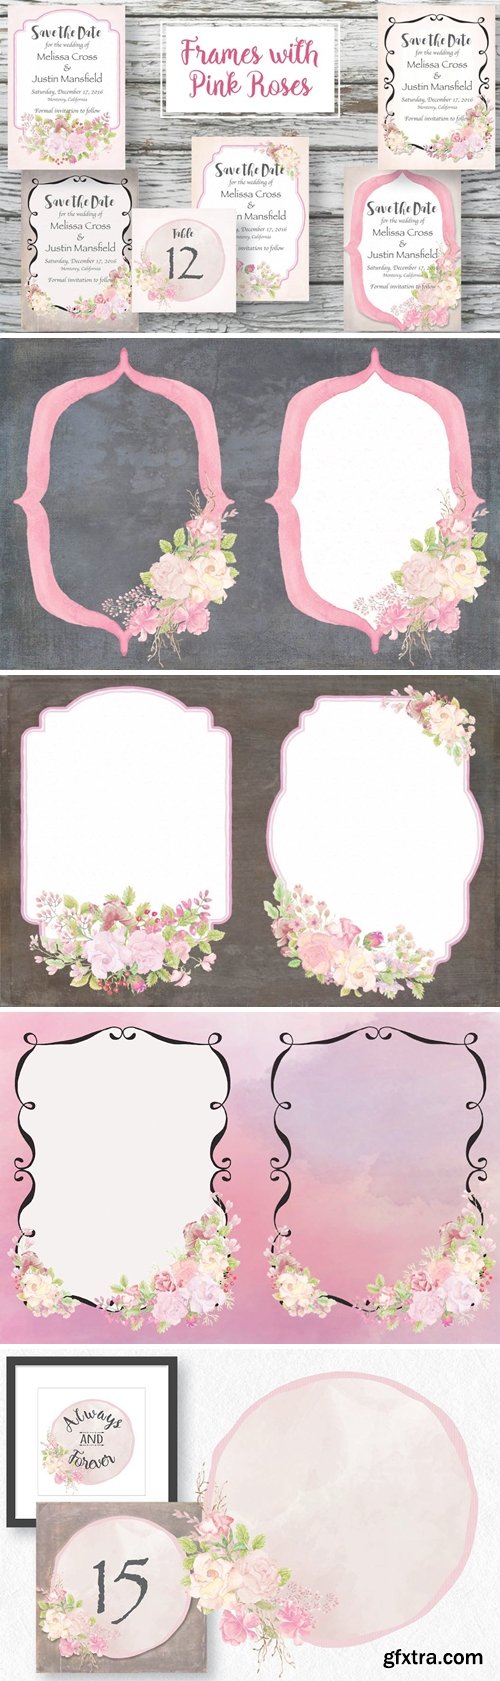 Frames with Pink Roses